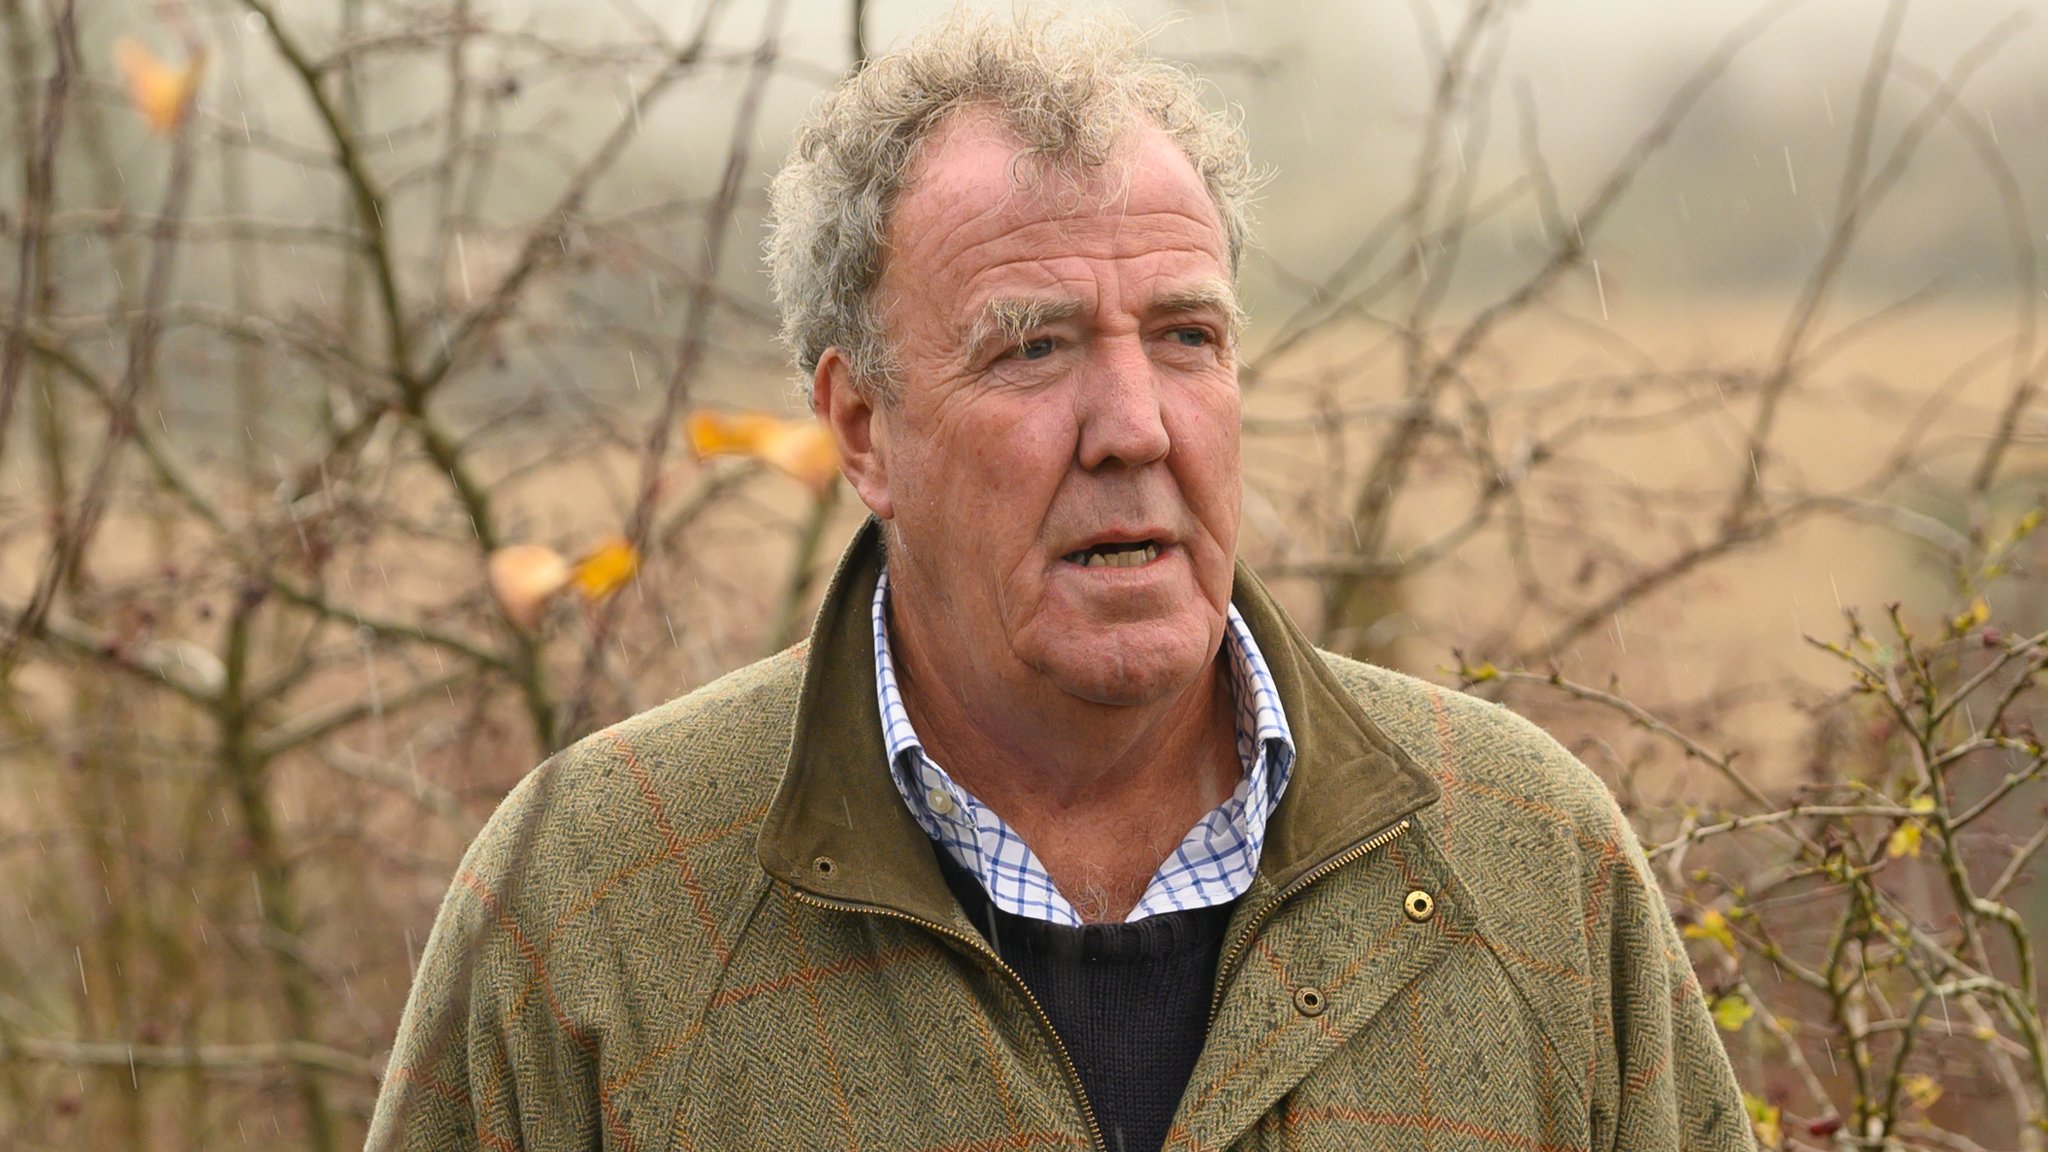 Jeremy Clarkson hits out at Hamilton again